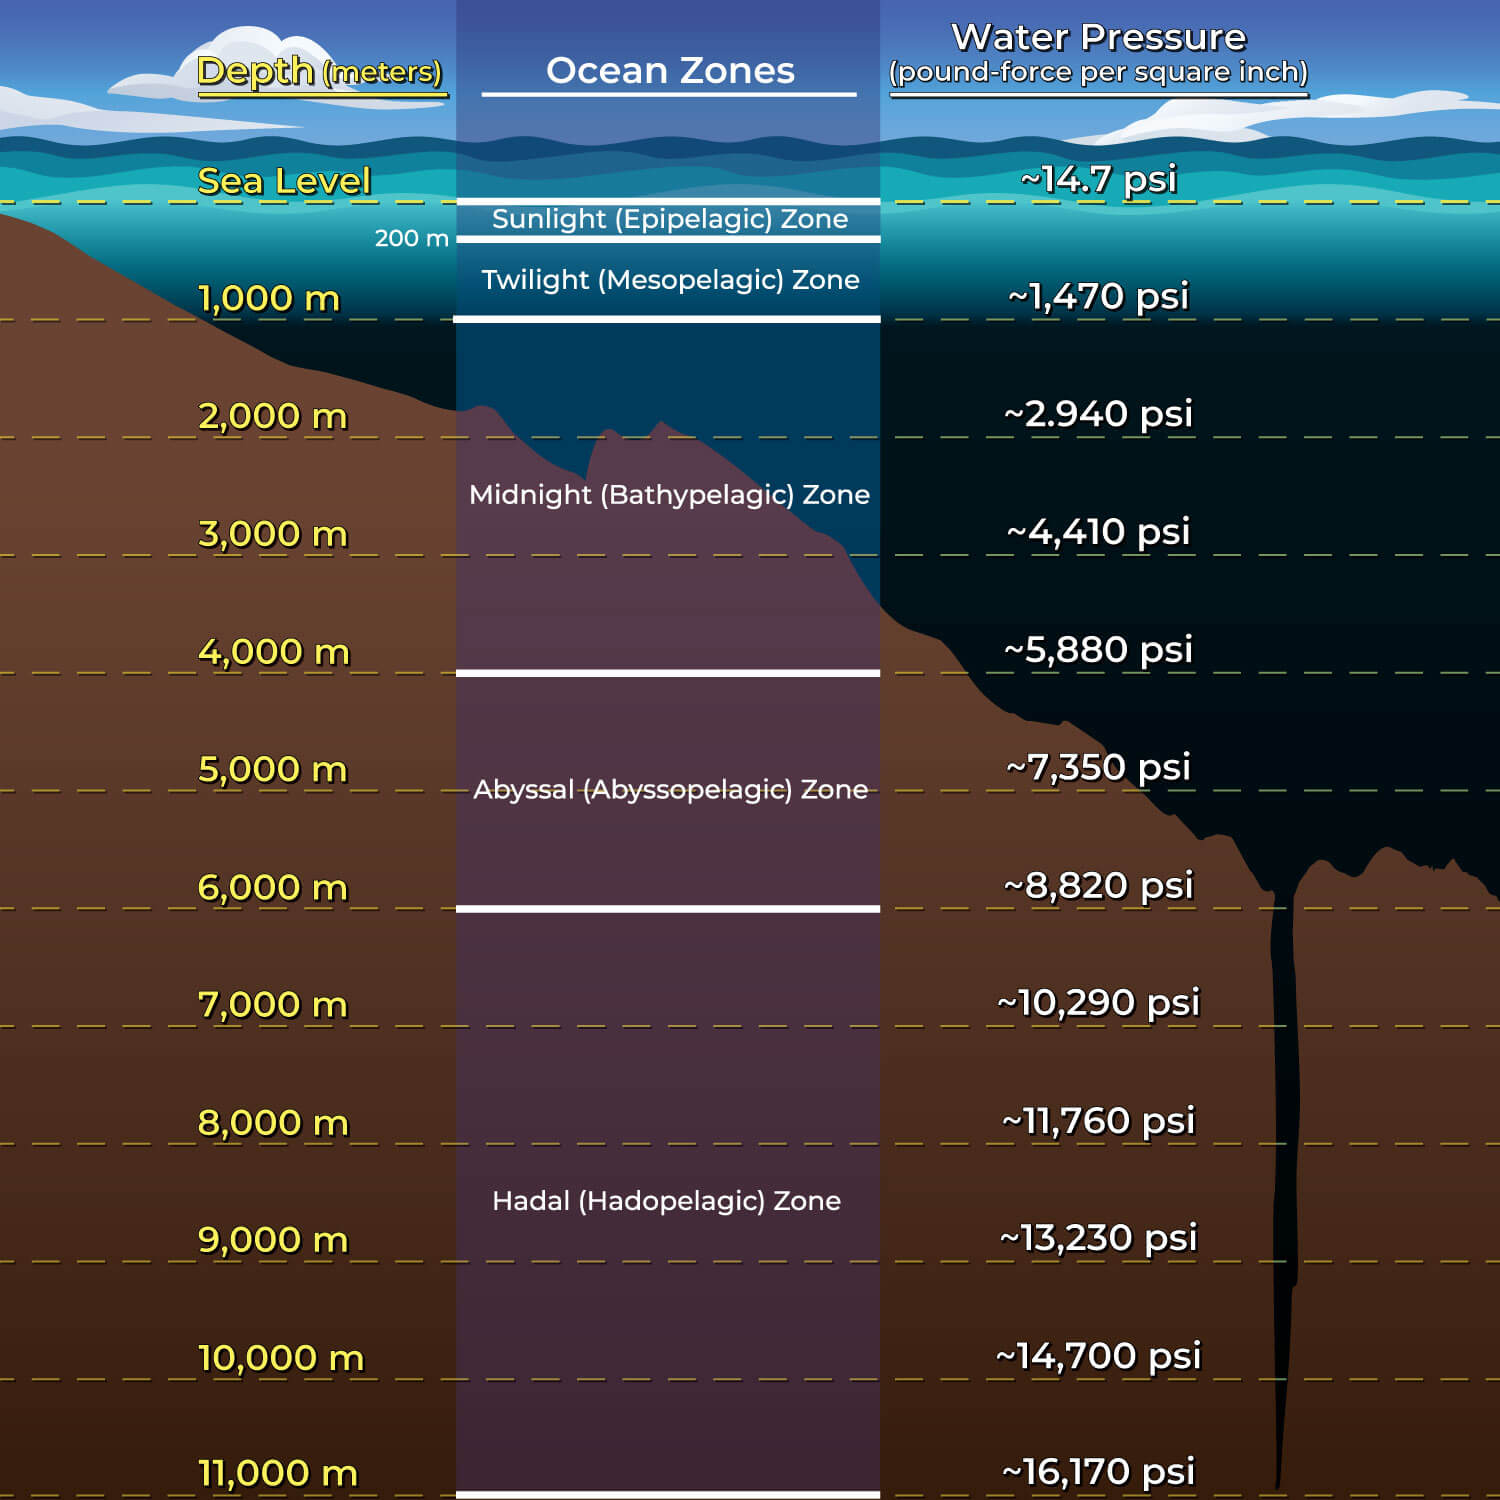 The water column of the open ocean is divided into five zones from the surface to the seafloor. Each zone varies in pressure, light, temperature, oxygen concentration, nutrients, and biological diversity.